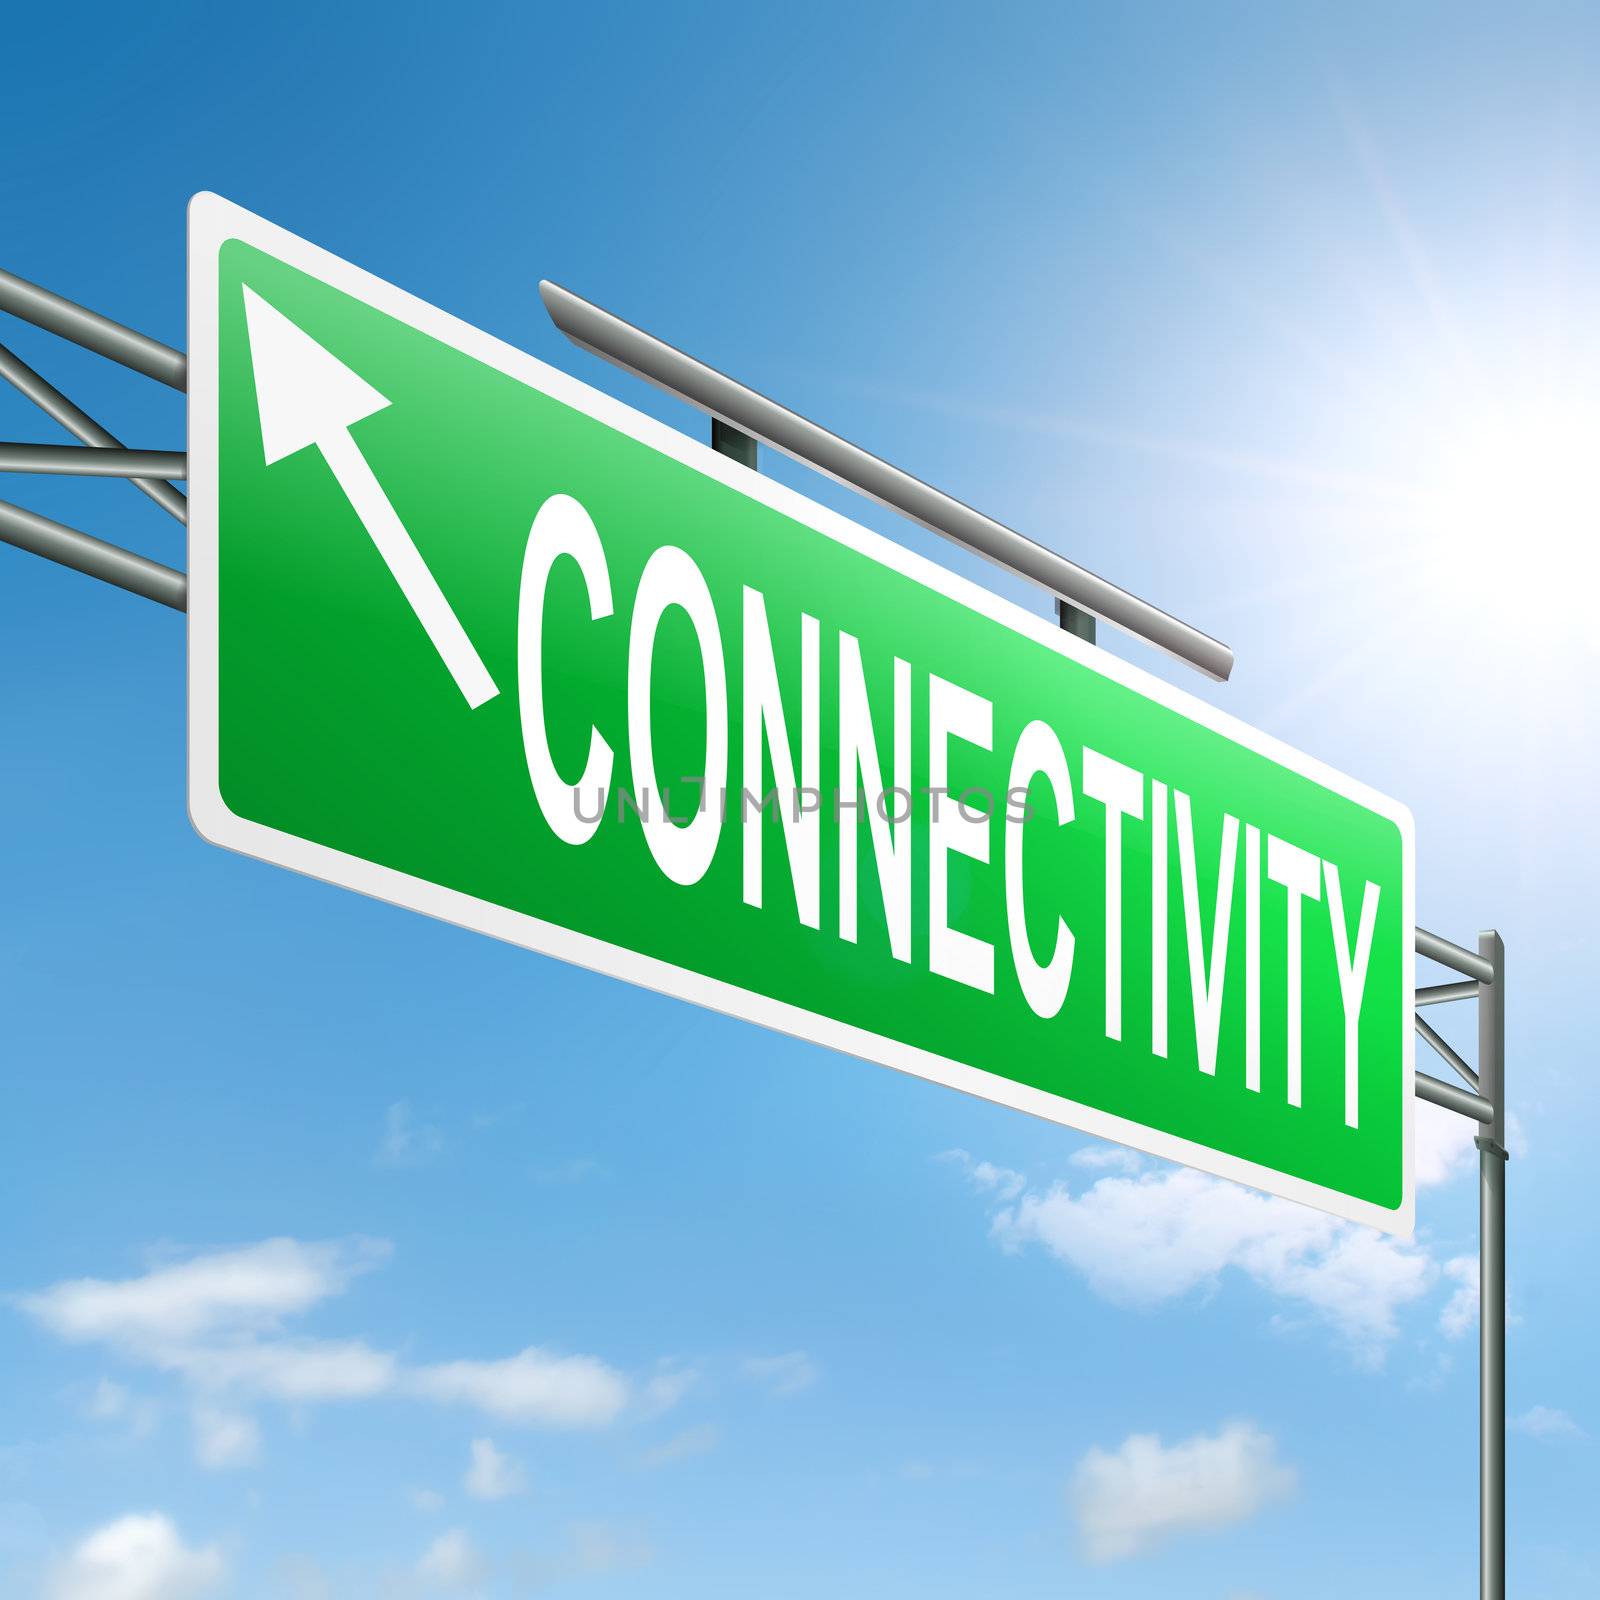 Illustration depicting a sign with a connectivity concept.